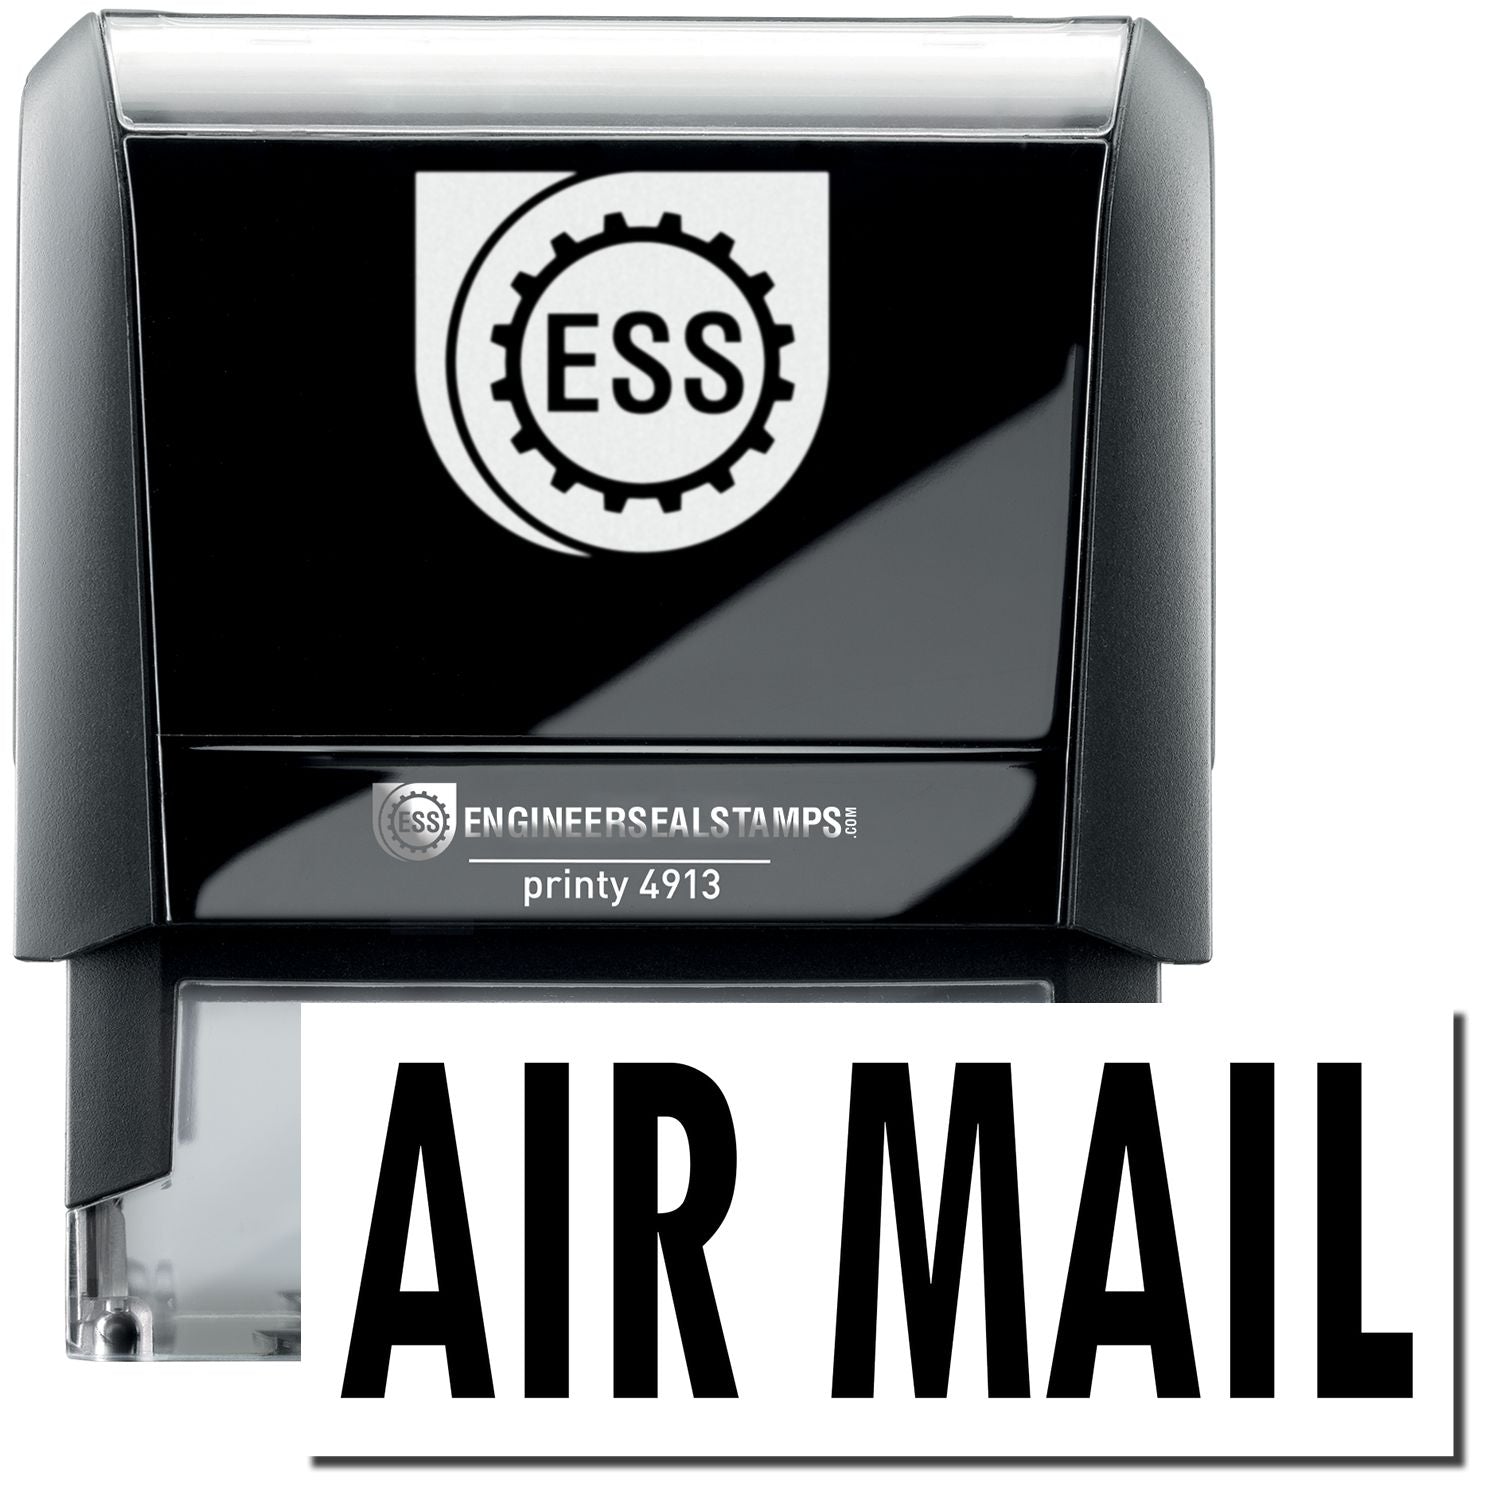 A large self-inking stamp with a stamped image showing the text "AIR MAIL" in large bold font.